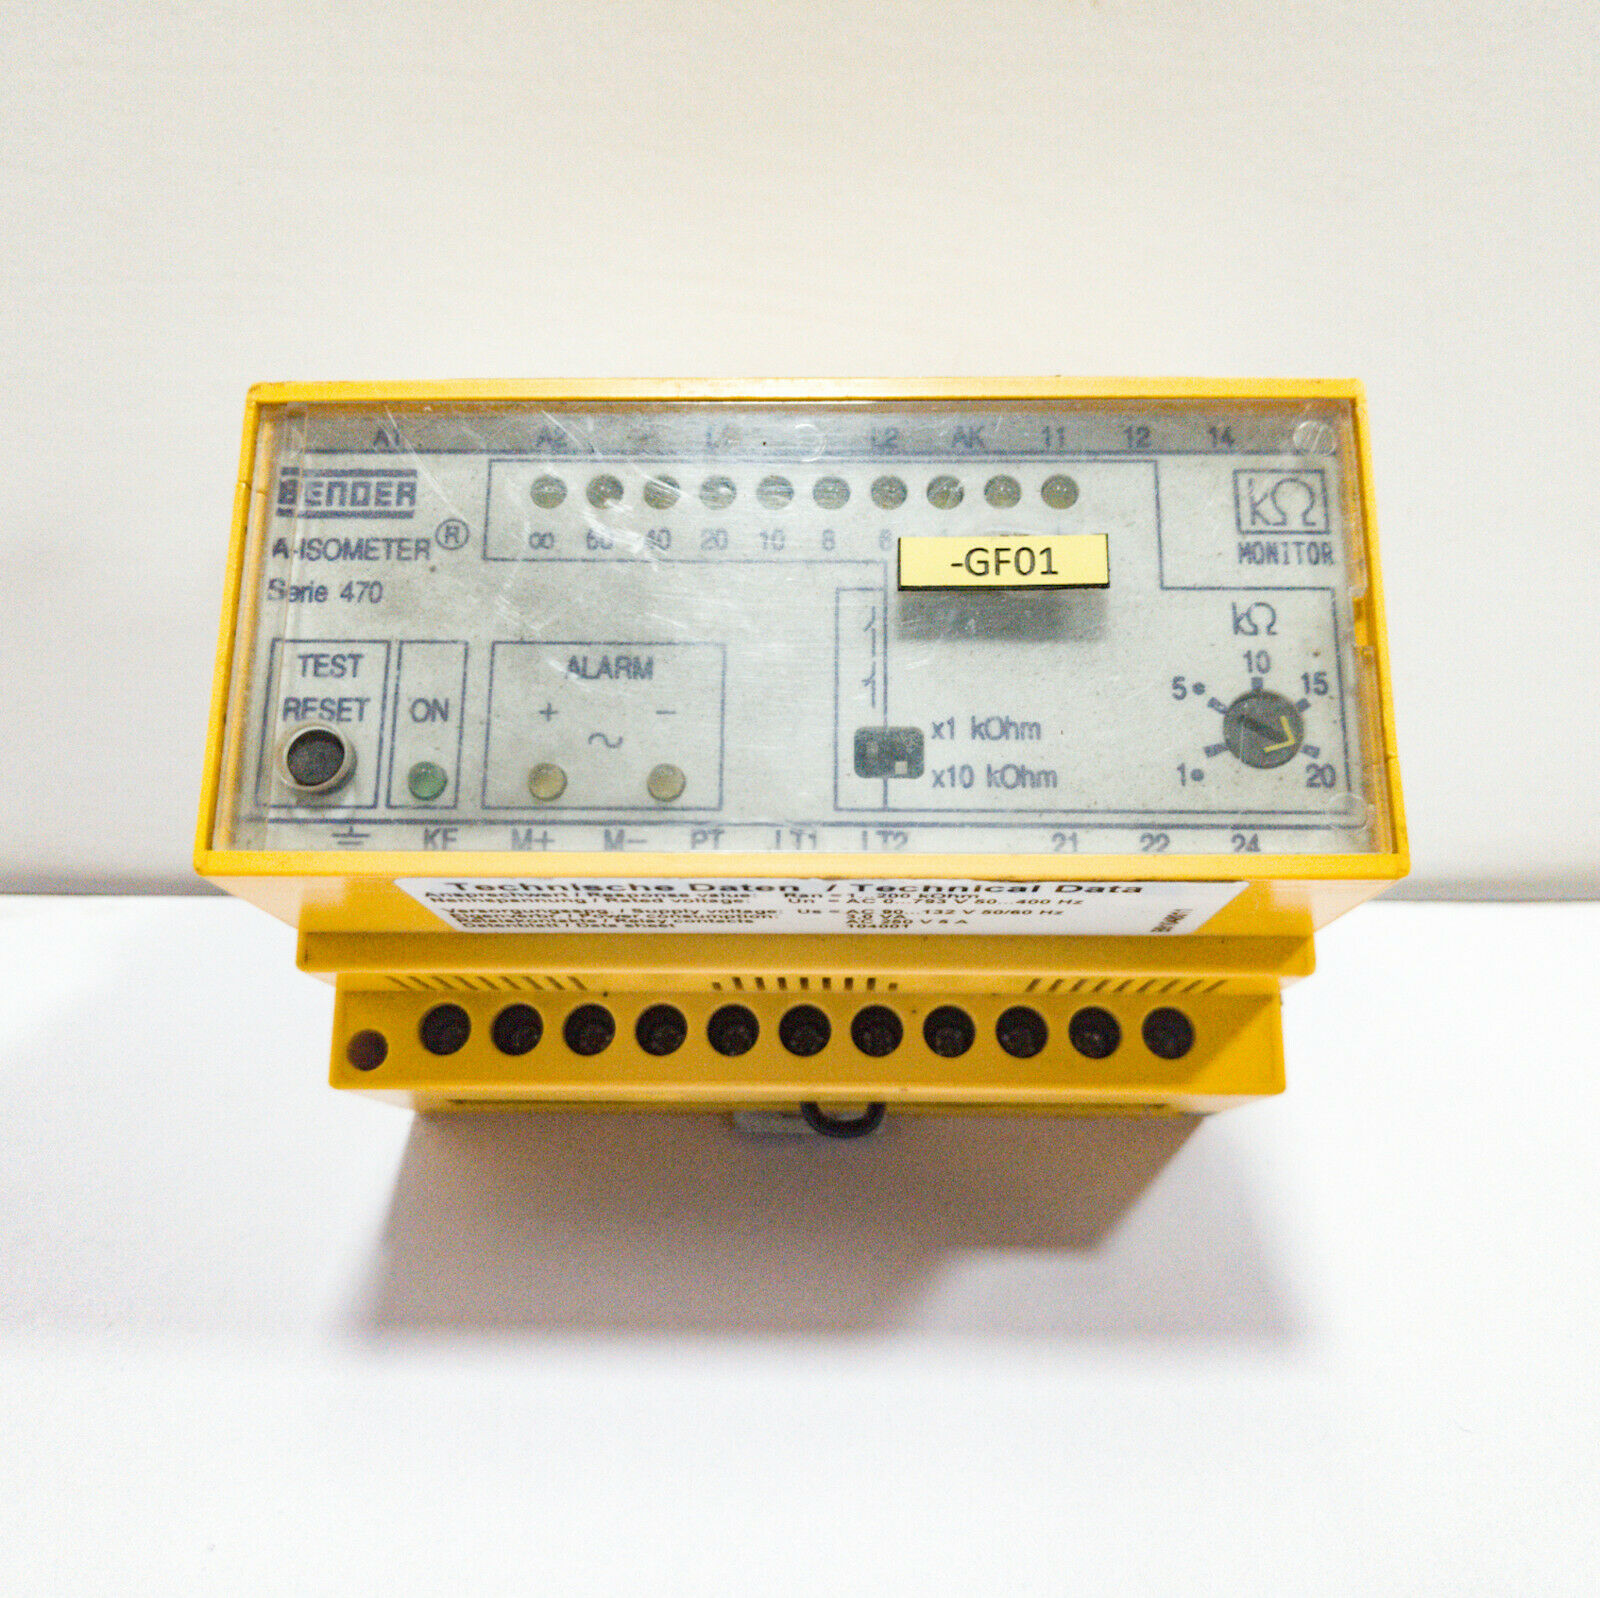 BENDER IR470LY-4013 INSULATION MONITORING DEVICE